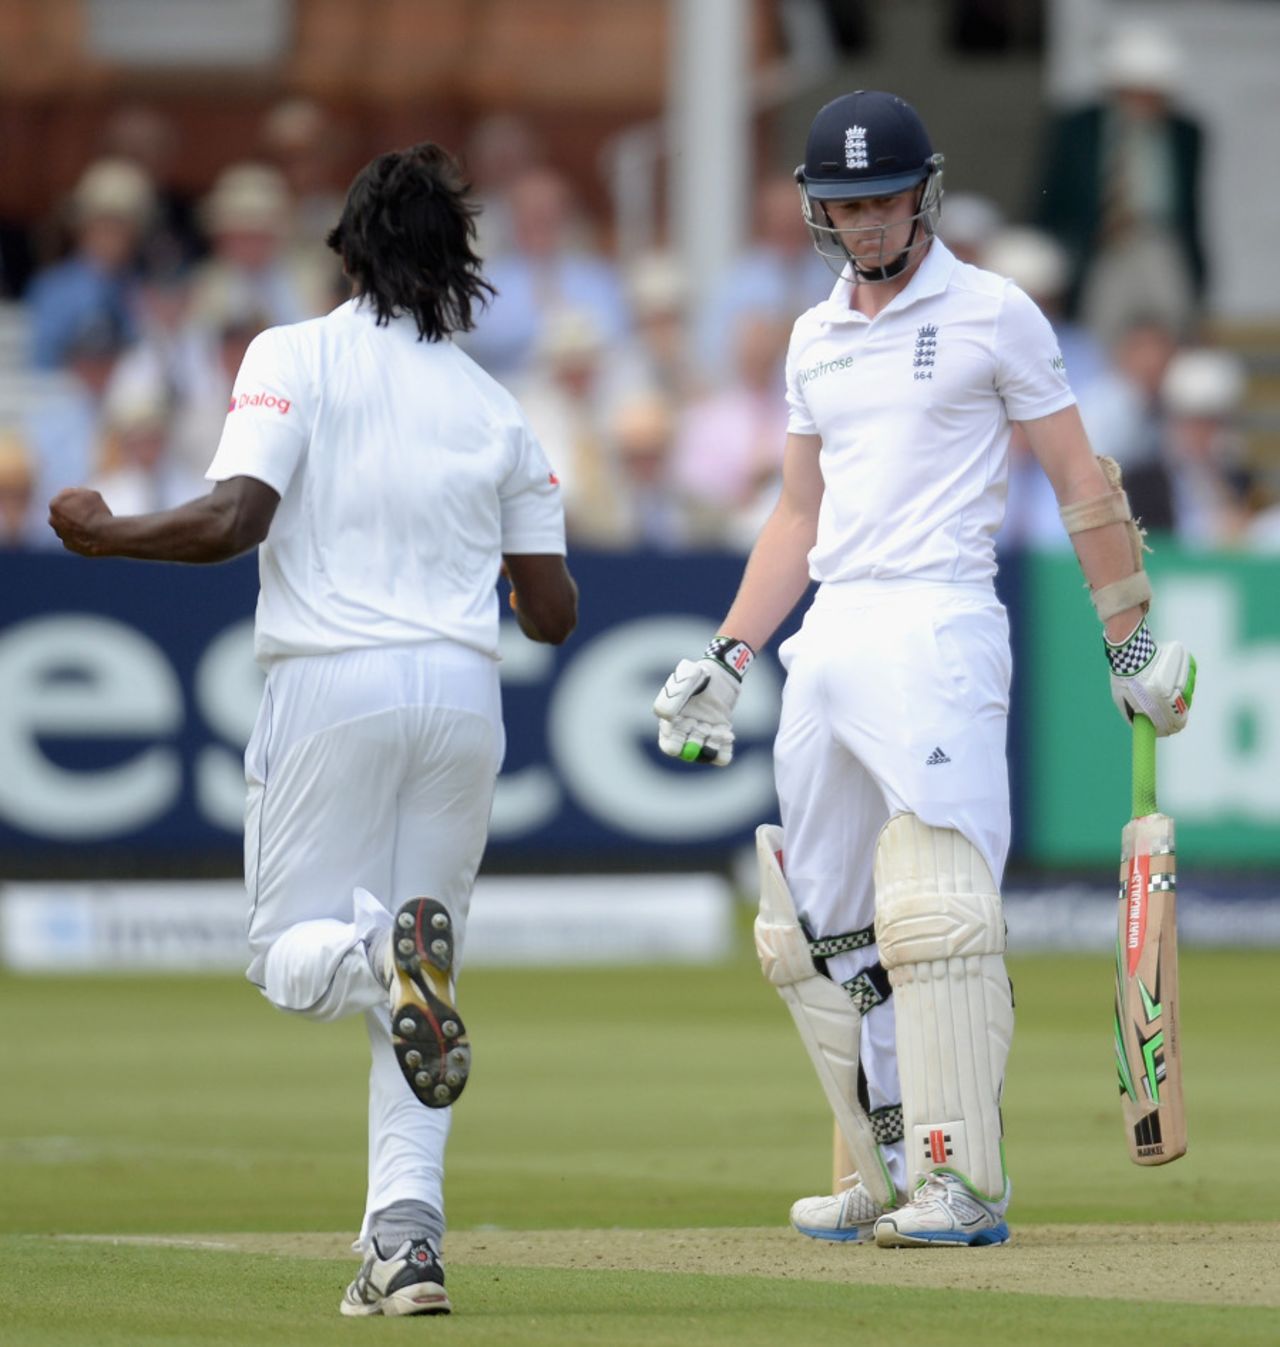 Sam Robson's first Test innings was ended for 1 when he edged Nuwan Pradeep, England v Sri Lanka, 1st Investec Test, Lord's, 1st day, June 12, 2014